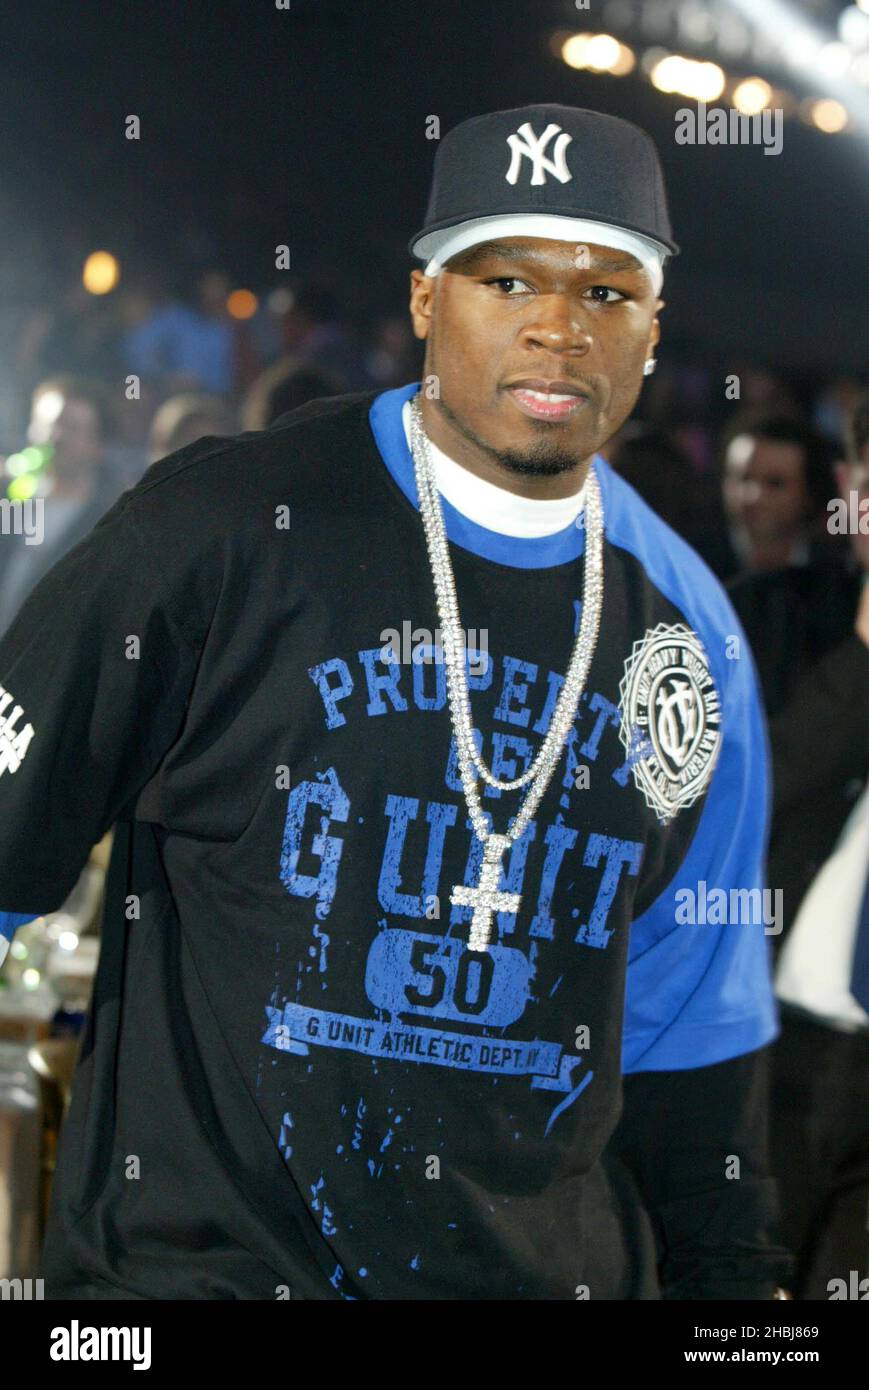 50 Cent at the 2004 Brits Awards. Stock Photo